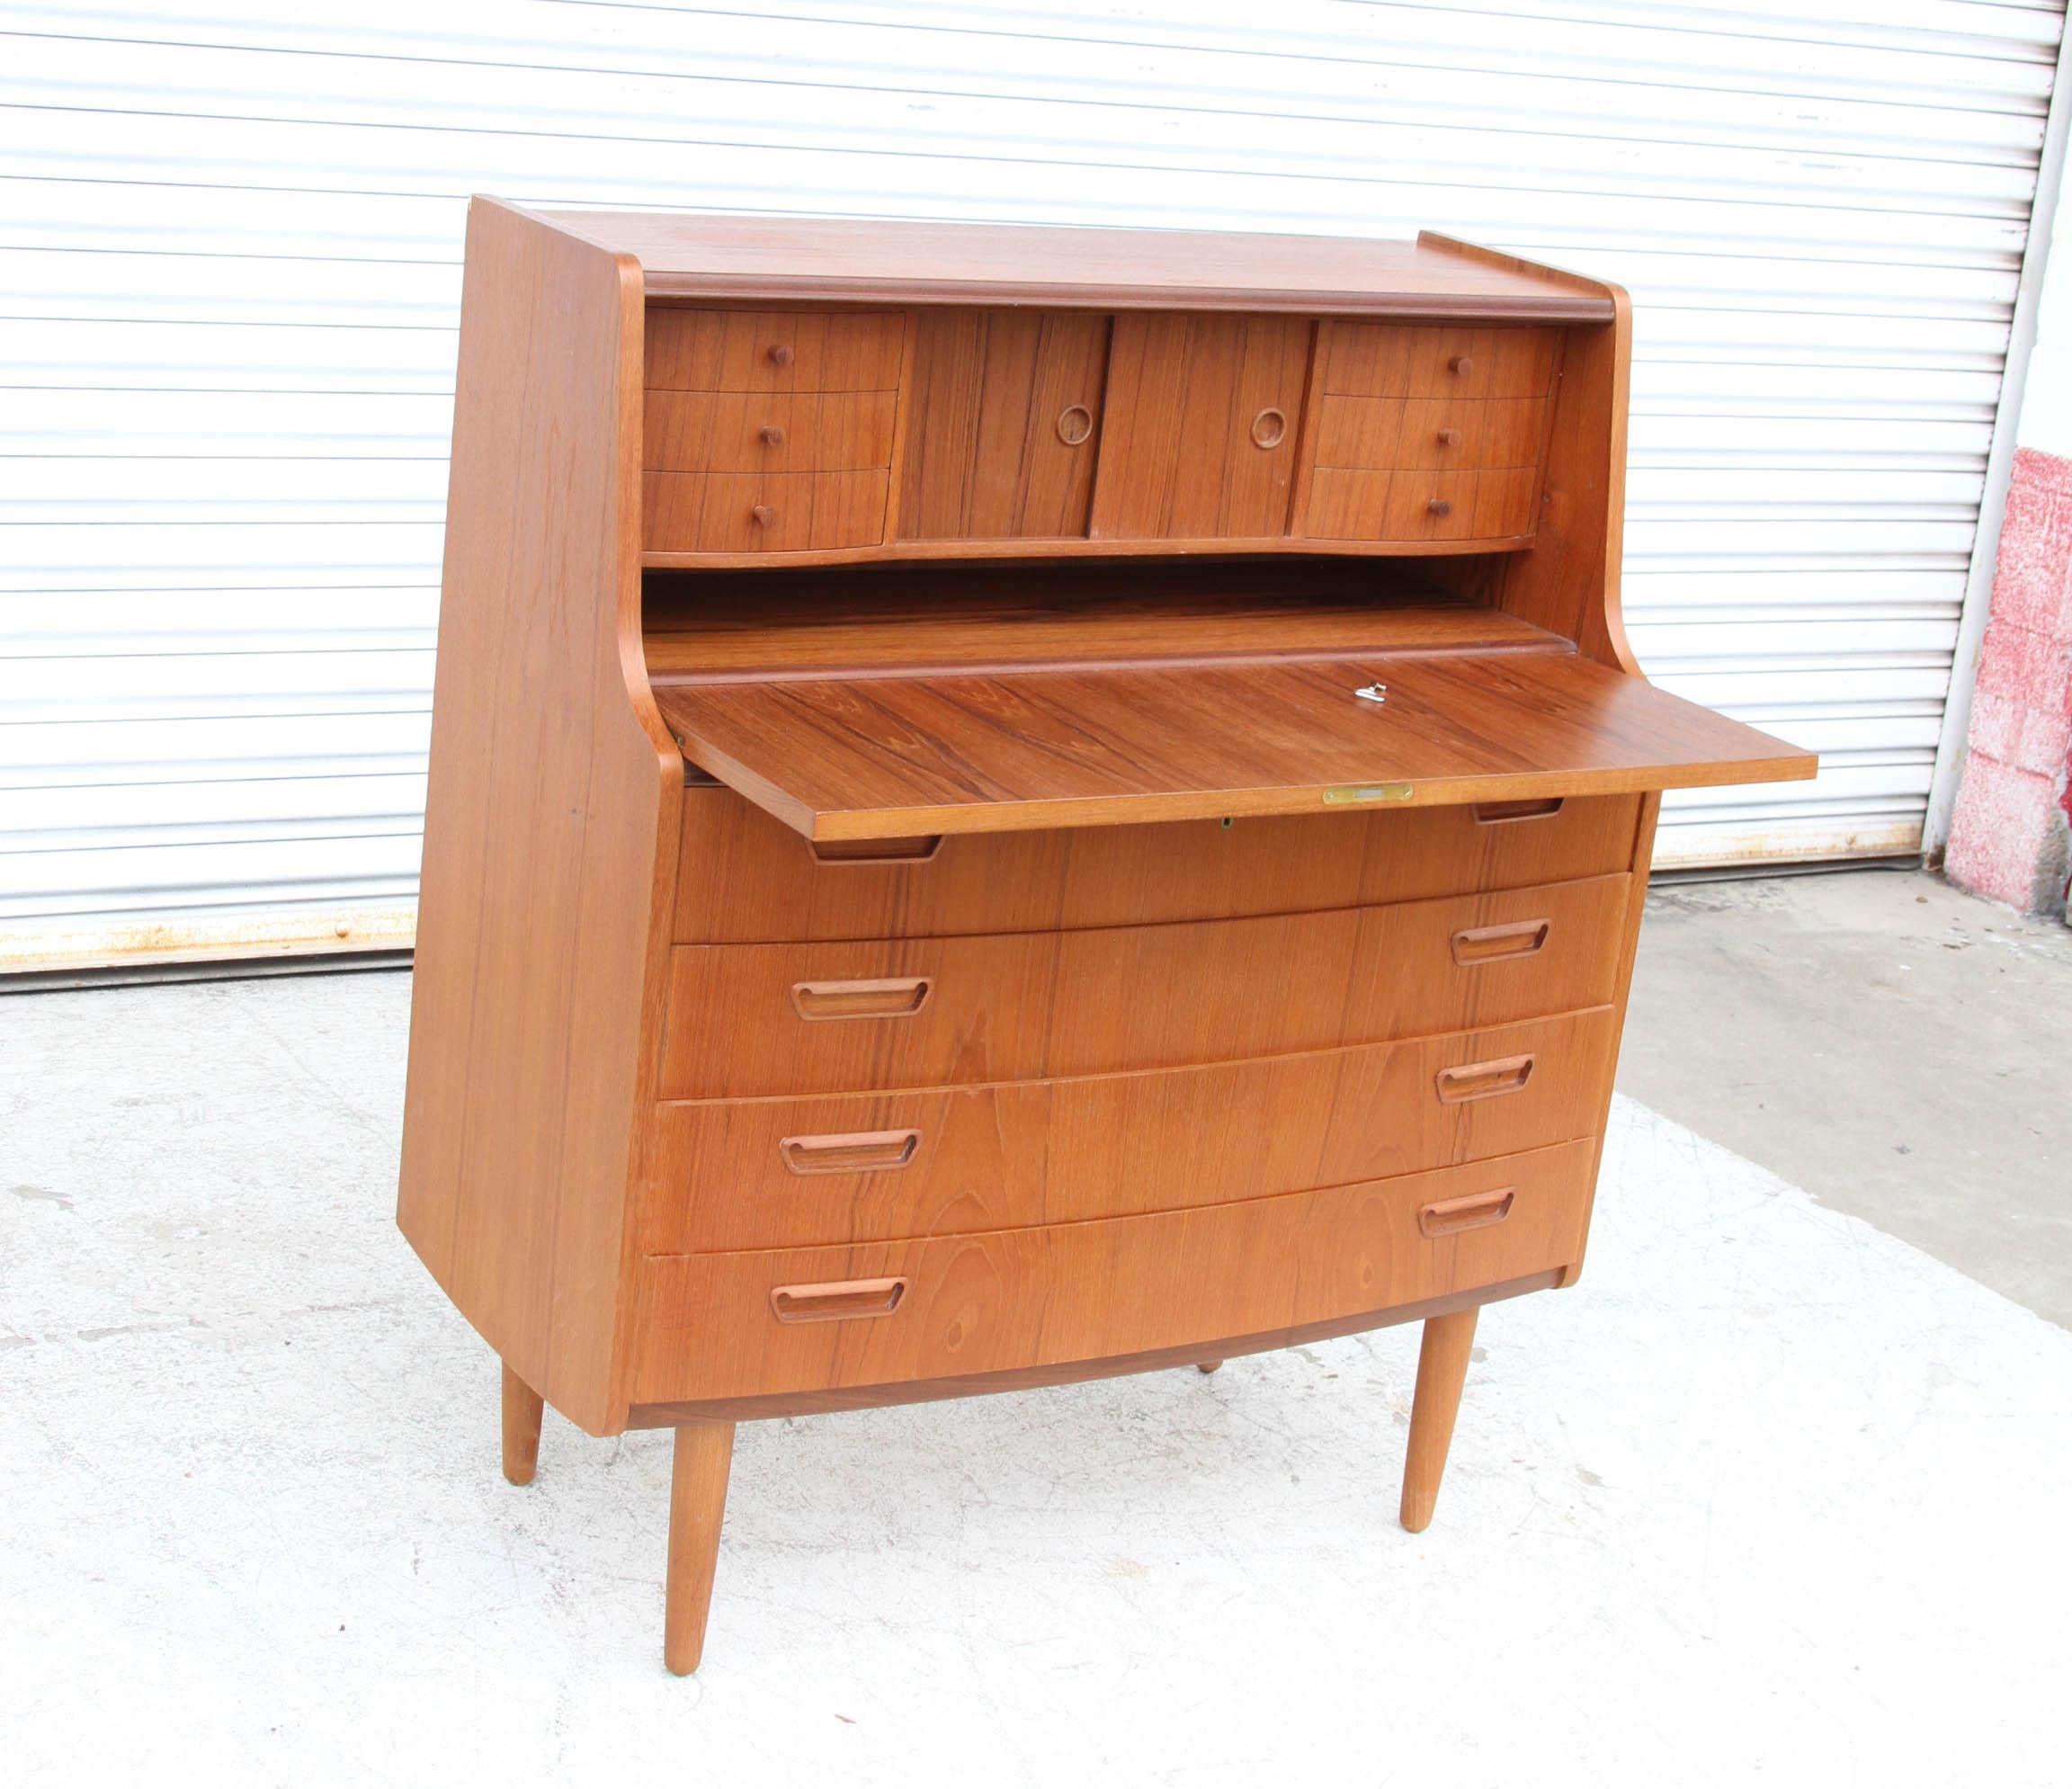 Vintage Danish midcentury teak secretary desk.
 
Danish modern teak secretary desk features a lockable, pull-down work surface opening to 6 drawers and sliding storage. One key is present. 
Pulls are reminiscent of Arne Vodder. Four tapered legs.